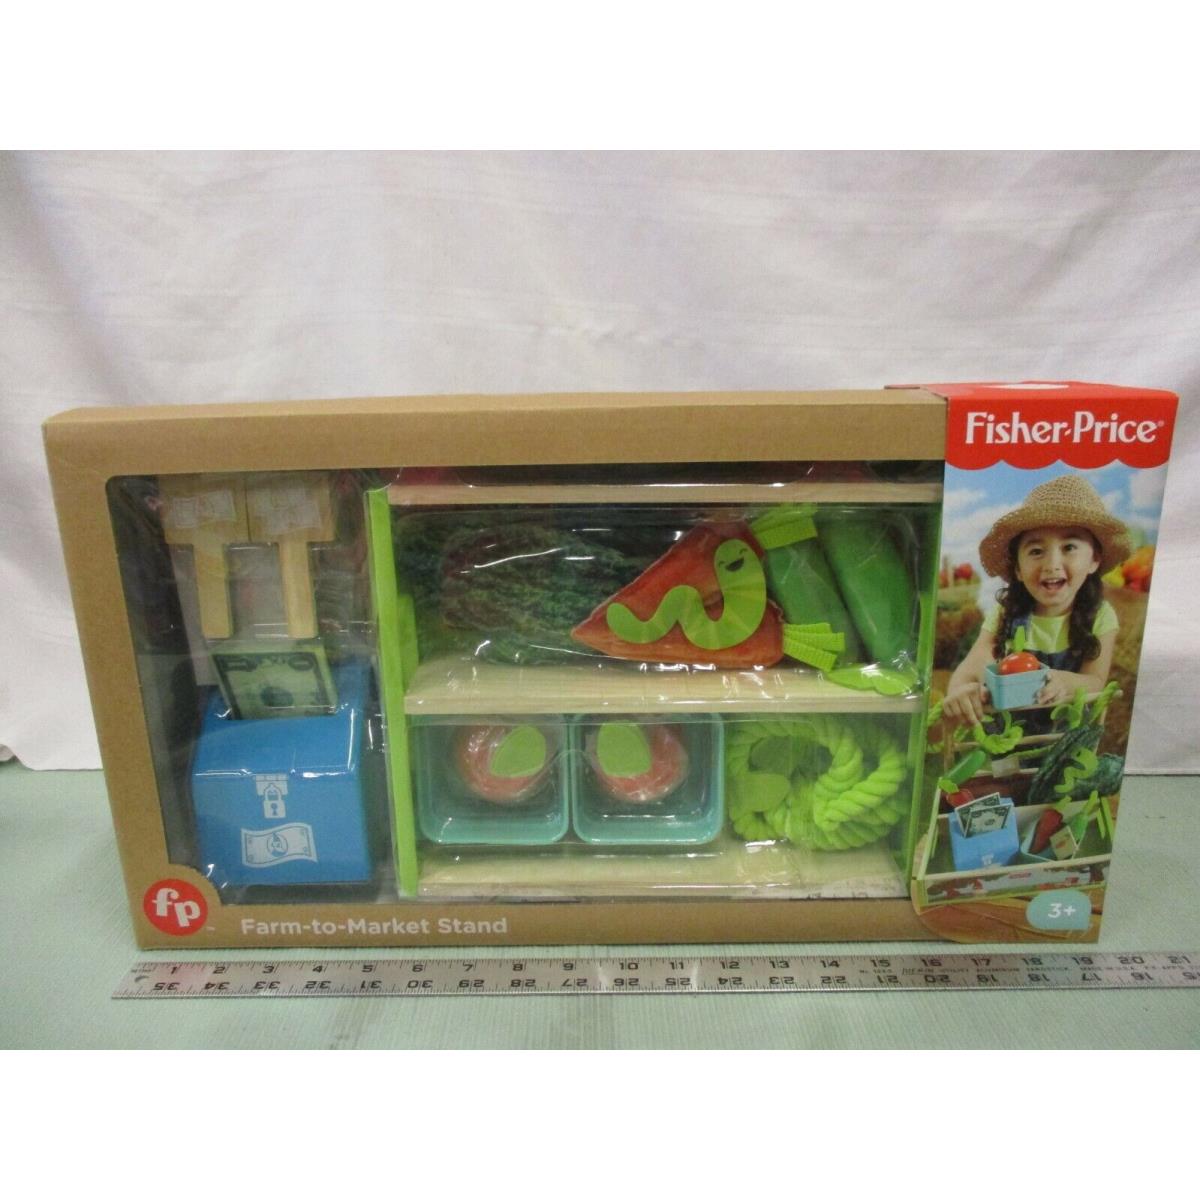 Fisher Price Farm-to-market Stand Play Set Play Food 17 Pieces Pretend Toy Play